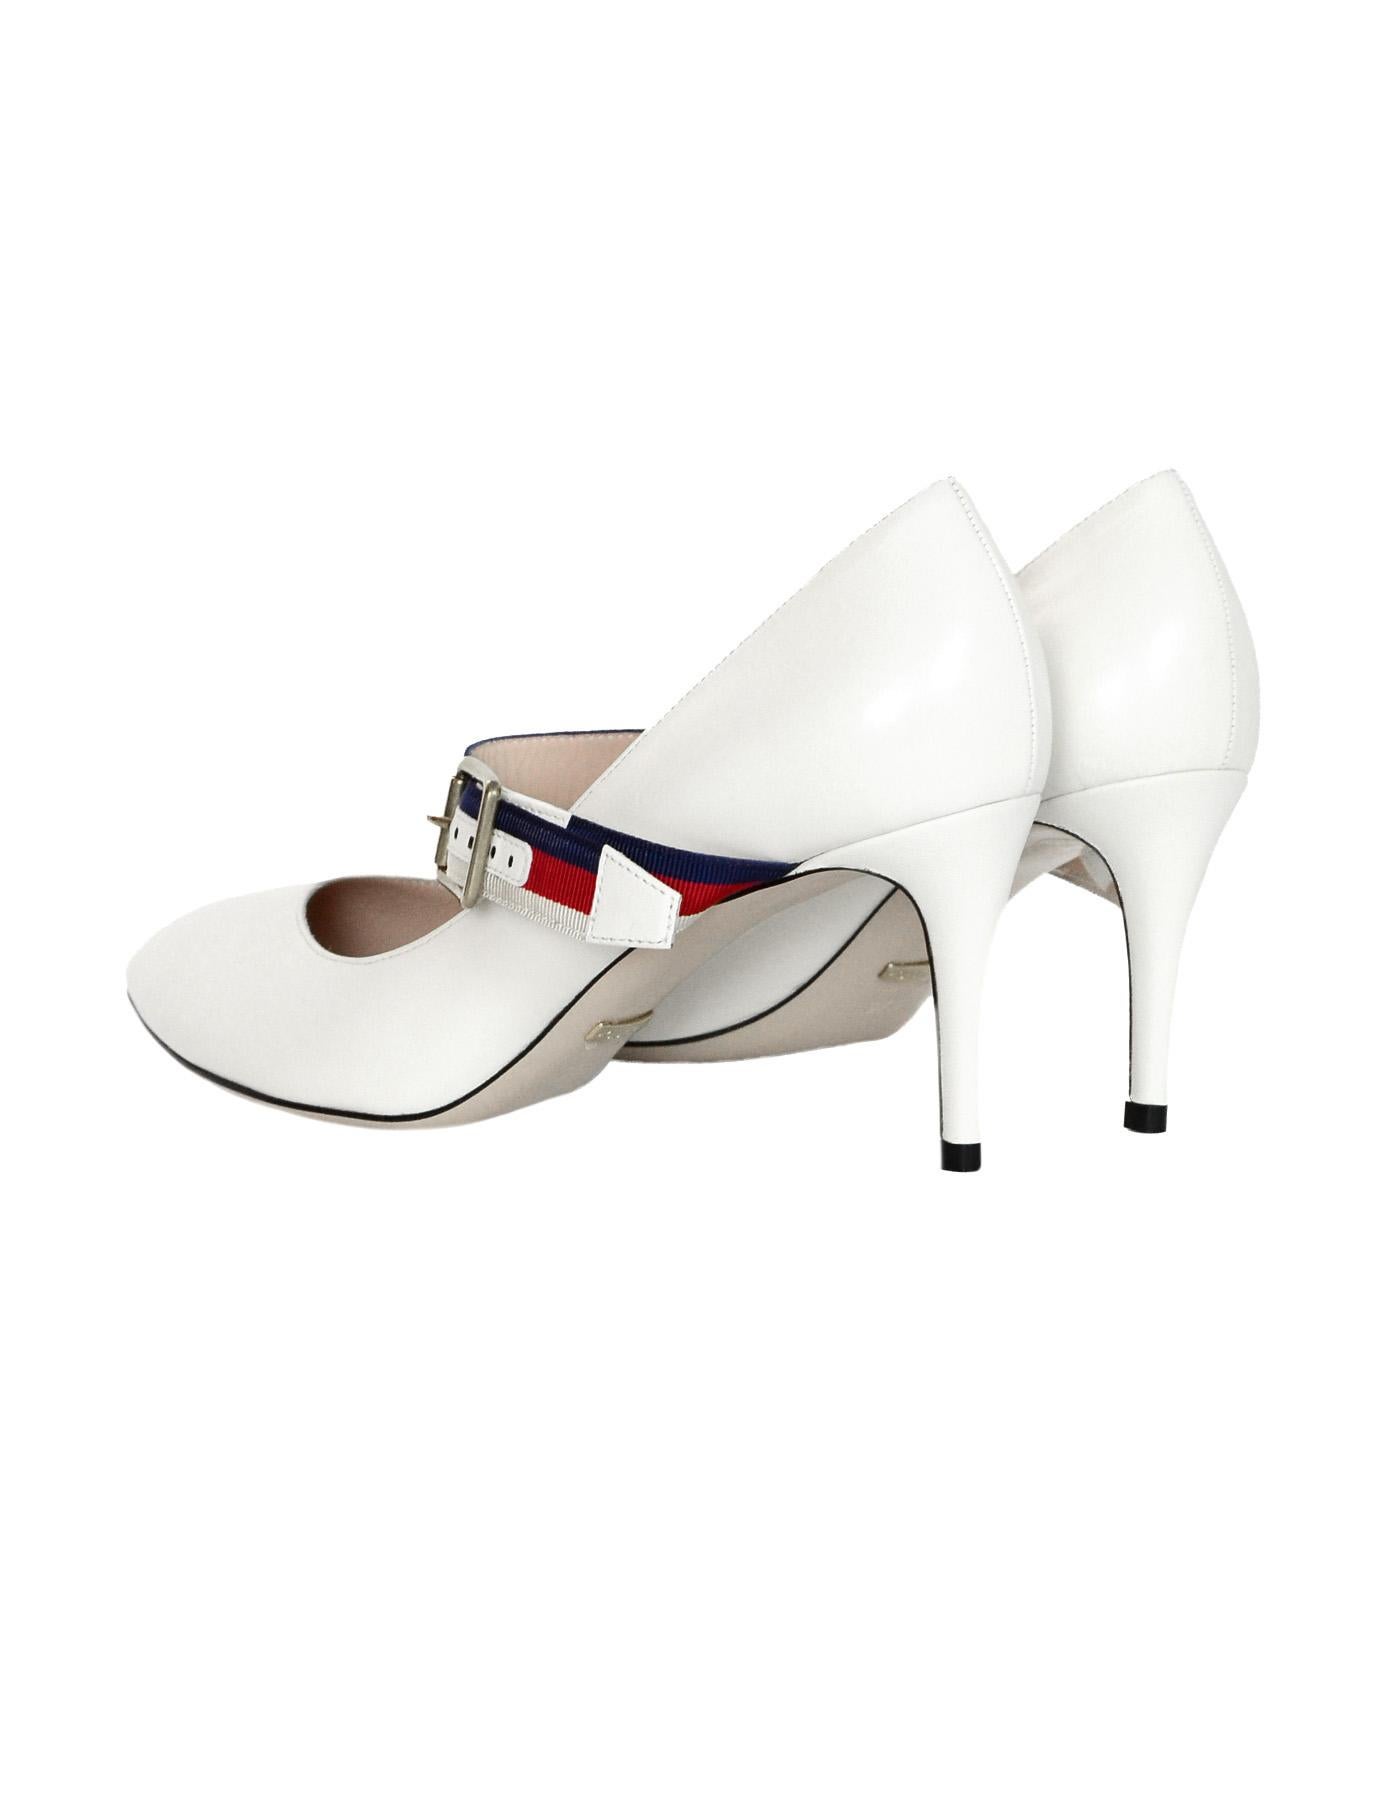 Gucci NEW White Leather Sylvie Pumps w. Red/Blue Grosgrain-Trimmed Web Sz 37.5 1